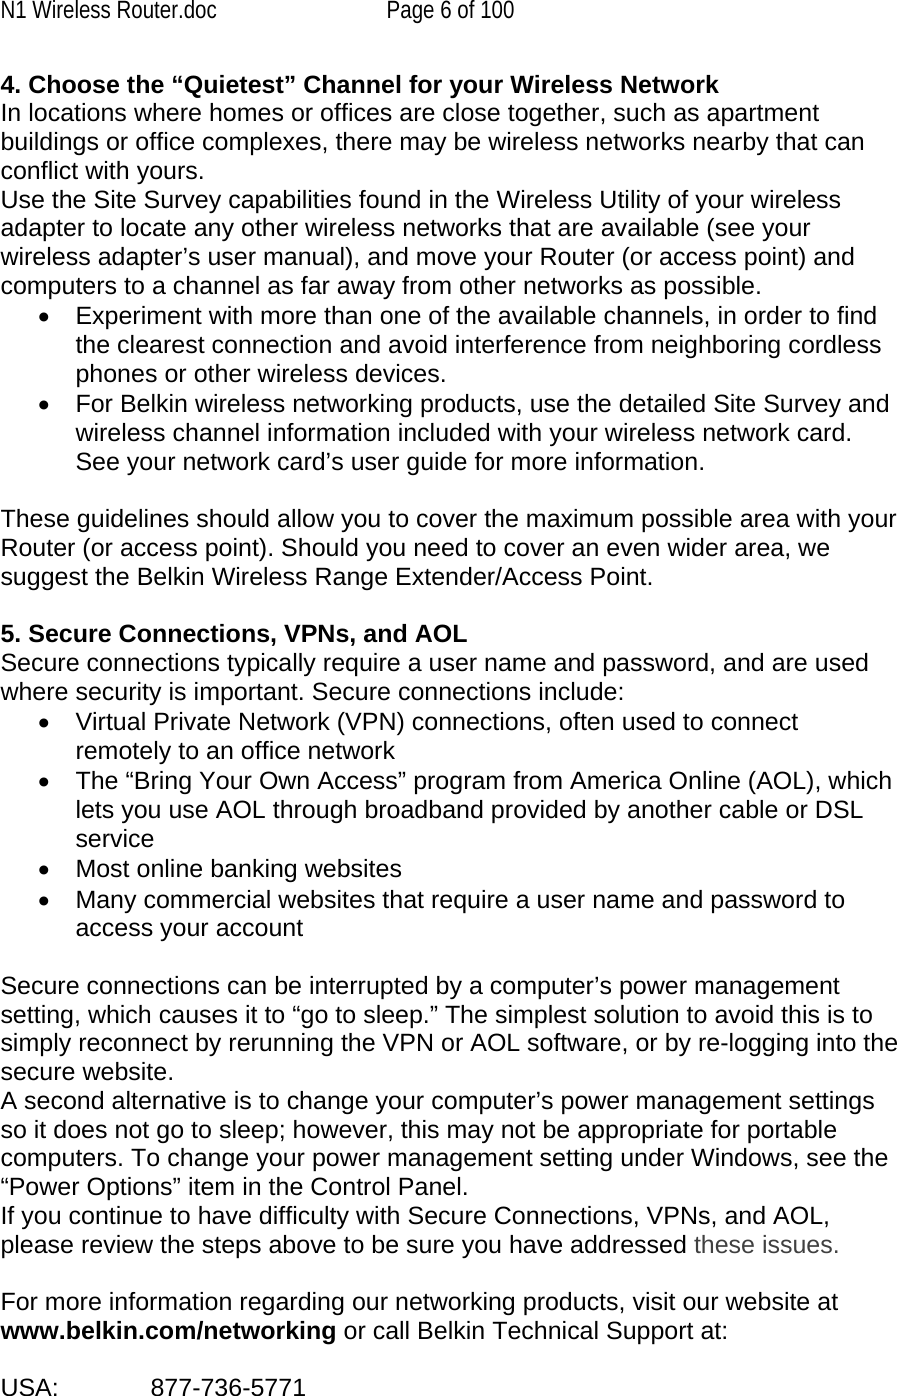 N1 Wireless Router.doc  Page 6 of 100 4. Choose the “Quietest” Channel for your Wireless Network In locations where homes or offices are close together, such as apartment buildings or office complexes, there may be wireless networks nearby that can conflict with yours.  Use the Site Survey capabilities found in the Wireless Utility of your wireless adapter to locate any other wireless networks that are available (see your wireless adapter’s user manual), and move your Router (or access point) and computers to a channel as far away from other networks as possible. •  Experiment with more than one of the available channels, in order to find the clearest connection and avoid interference from neighboring cordless phones or other wireless devices.  •  For Belkin wireless networking products, use the detailed Site Survey and wireless channel information included with your wireless network card. See your network card’s user guide for more information.  These guidelines should allow you to cover the maximum possible area with your Router (or access point). Should you need to cover an even wider area, we suggest the Belkin Wireless Range Extender/Access Point.  5. Secure Connections, VPNs, and AOL Secure connections typically require a user name and password, and are used where security is important. Secure connections include: •  Virtual Private Network (VPN) connections, often used to connect remotely to an office network •  The “Bring Your Own Access” program from America Online (AOL), which lets you use AOL through broadband provided by another cable or DSL service •  Most online banking websites •  Many commercial websites that require a user name and password to access your account   Secure connections can be interrupted by a computer’s power management setting, which causes it to “go to sleep.” The simplest solution to avoid this is to simply reconnect by rerunning the VPN or AOL software, or by re-logging into the secure website. A second alternative is to change your computer’s power management settings so it does not go to sleep; however, this may not be appropriate for portable computers. To change your power management setting under Windows, see the “Power Options” item in the Control Panel. If you continue to have difficulty with Secure Connections, VPNs, and AOL, please review the steps above to be sure you have addressed these issues.  For more information regarding our networking products, visit our website at www.belkin.com/networking or call Belkin Technical Support at:  USA:    877-736-5771  